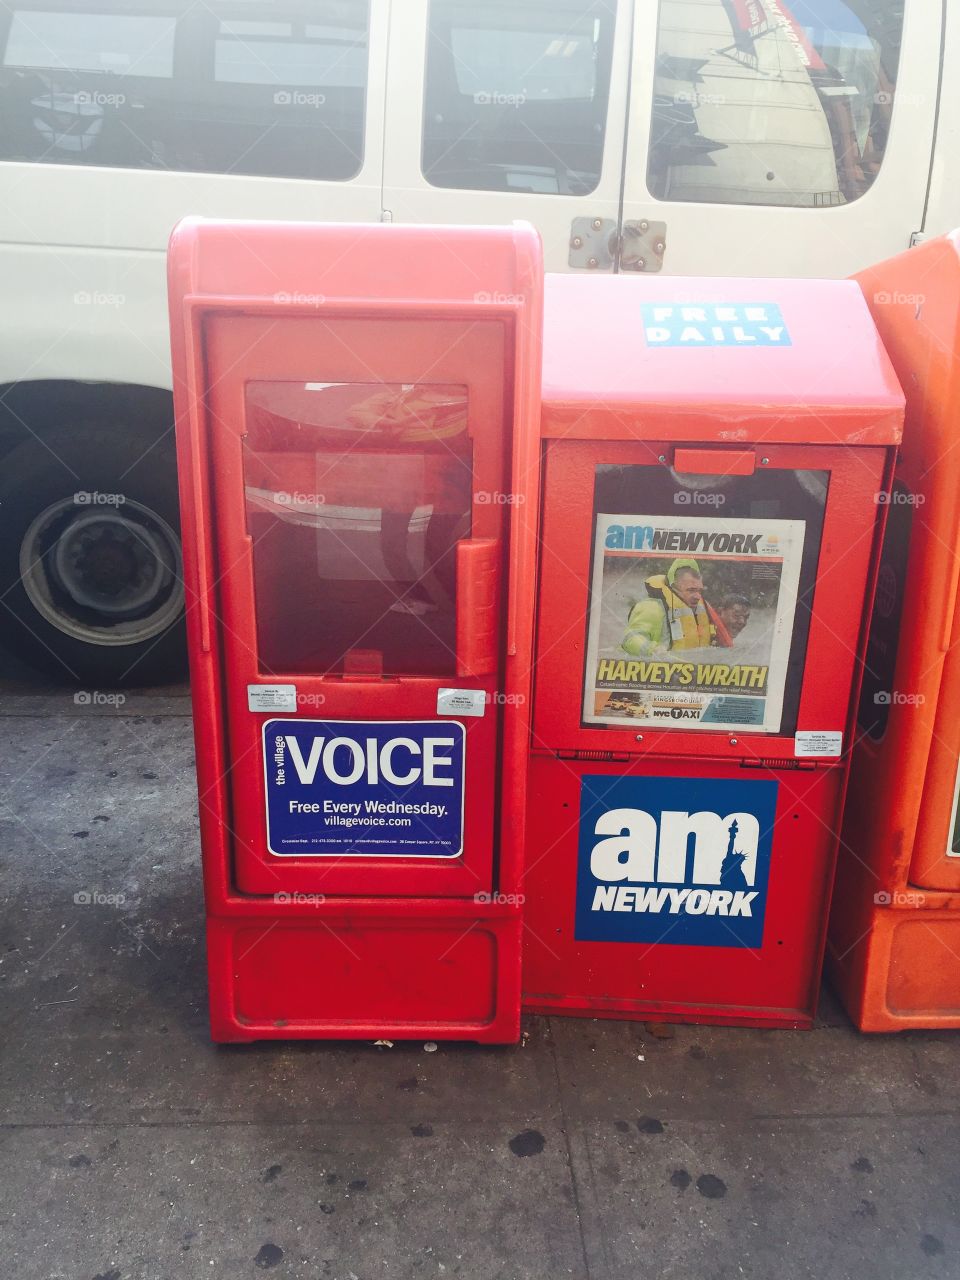 For those without a Village Voice